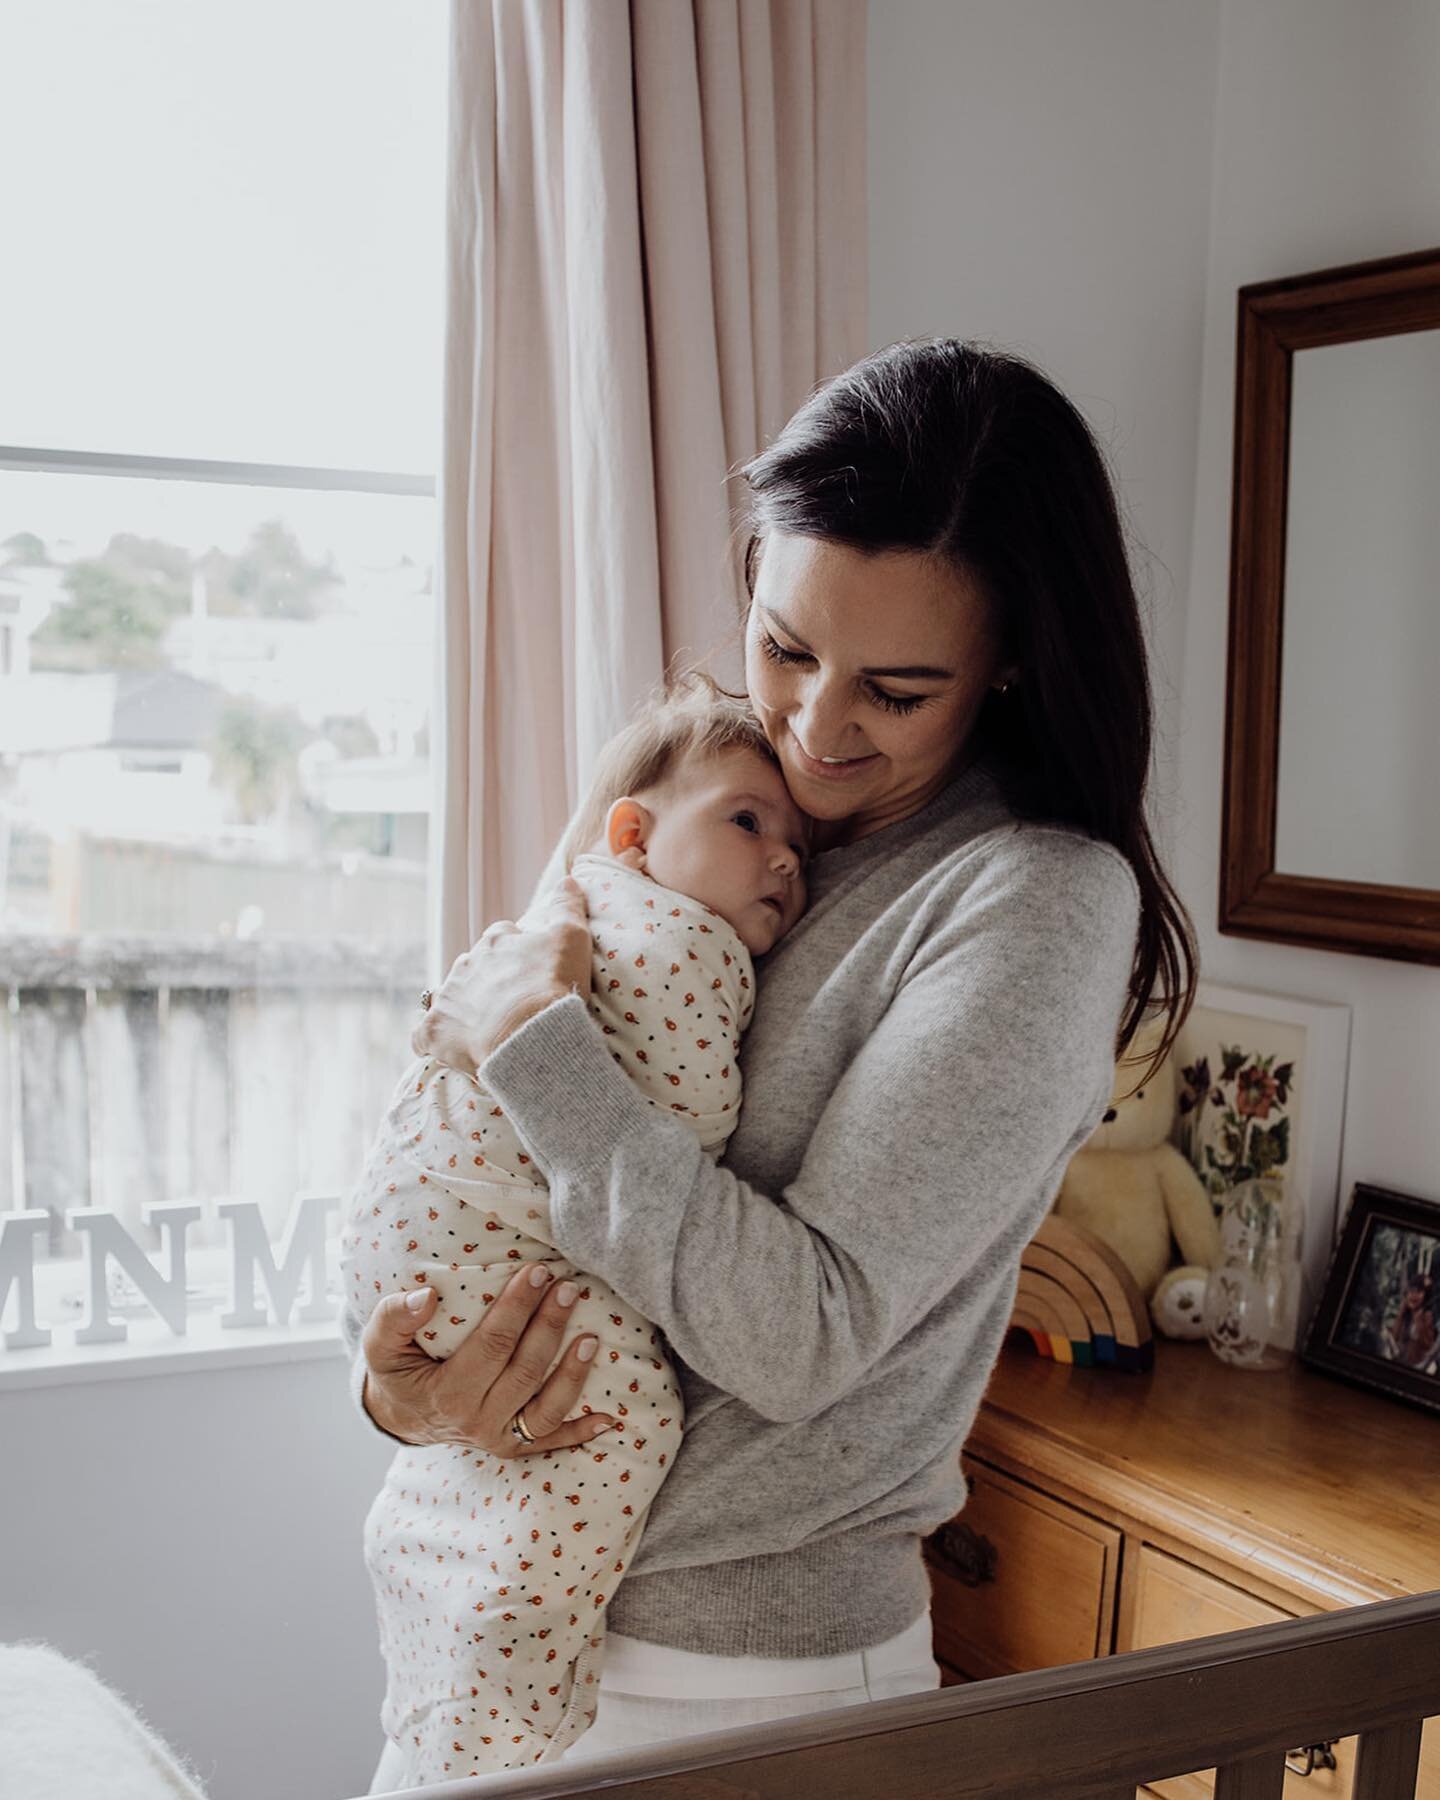 I&rsquo;m Hattie from A Sister Mama, I offer a variety of packages to support new mamas and their babies.
With customised routines, and evidence-based help with sleep and settling, I will ensure you &amp; your little one continue to thrive together. 